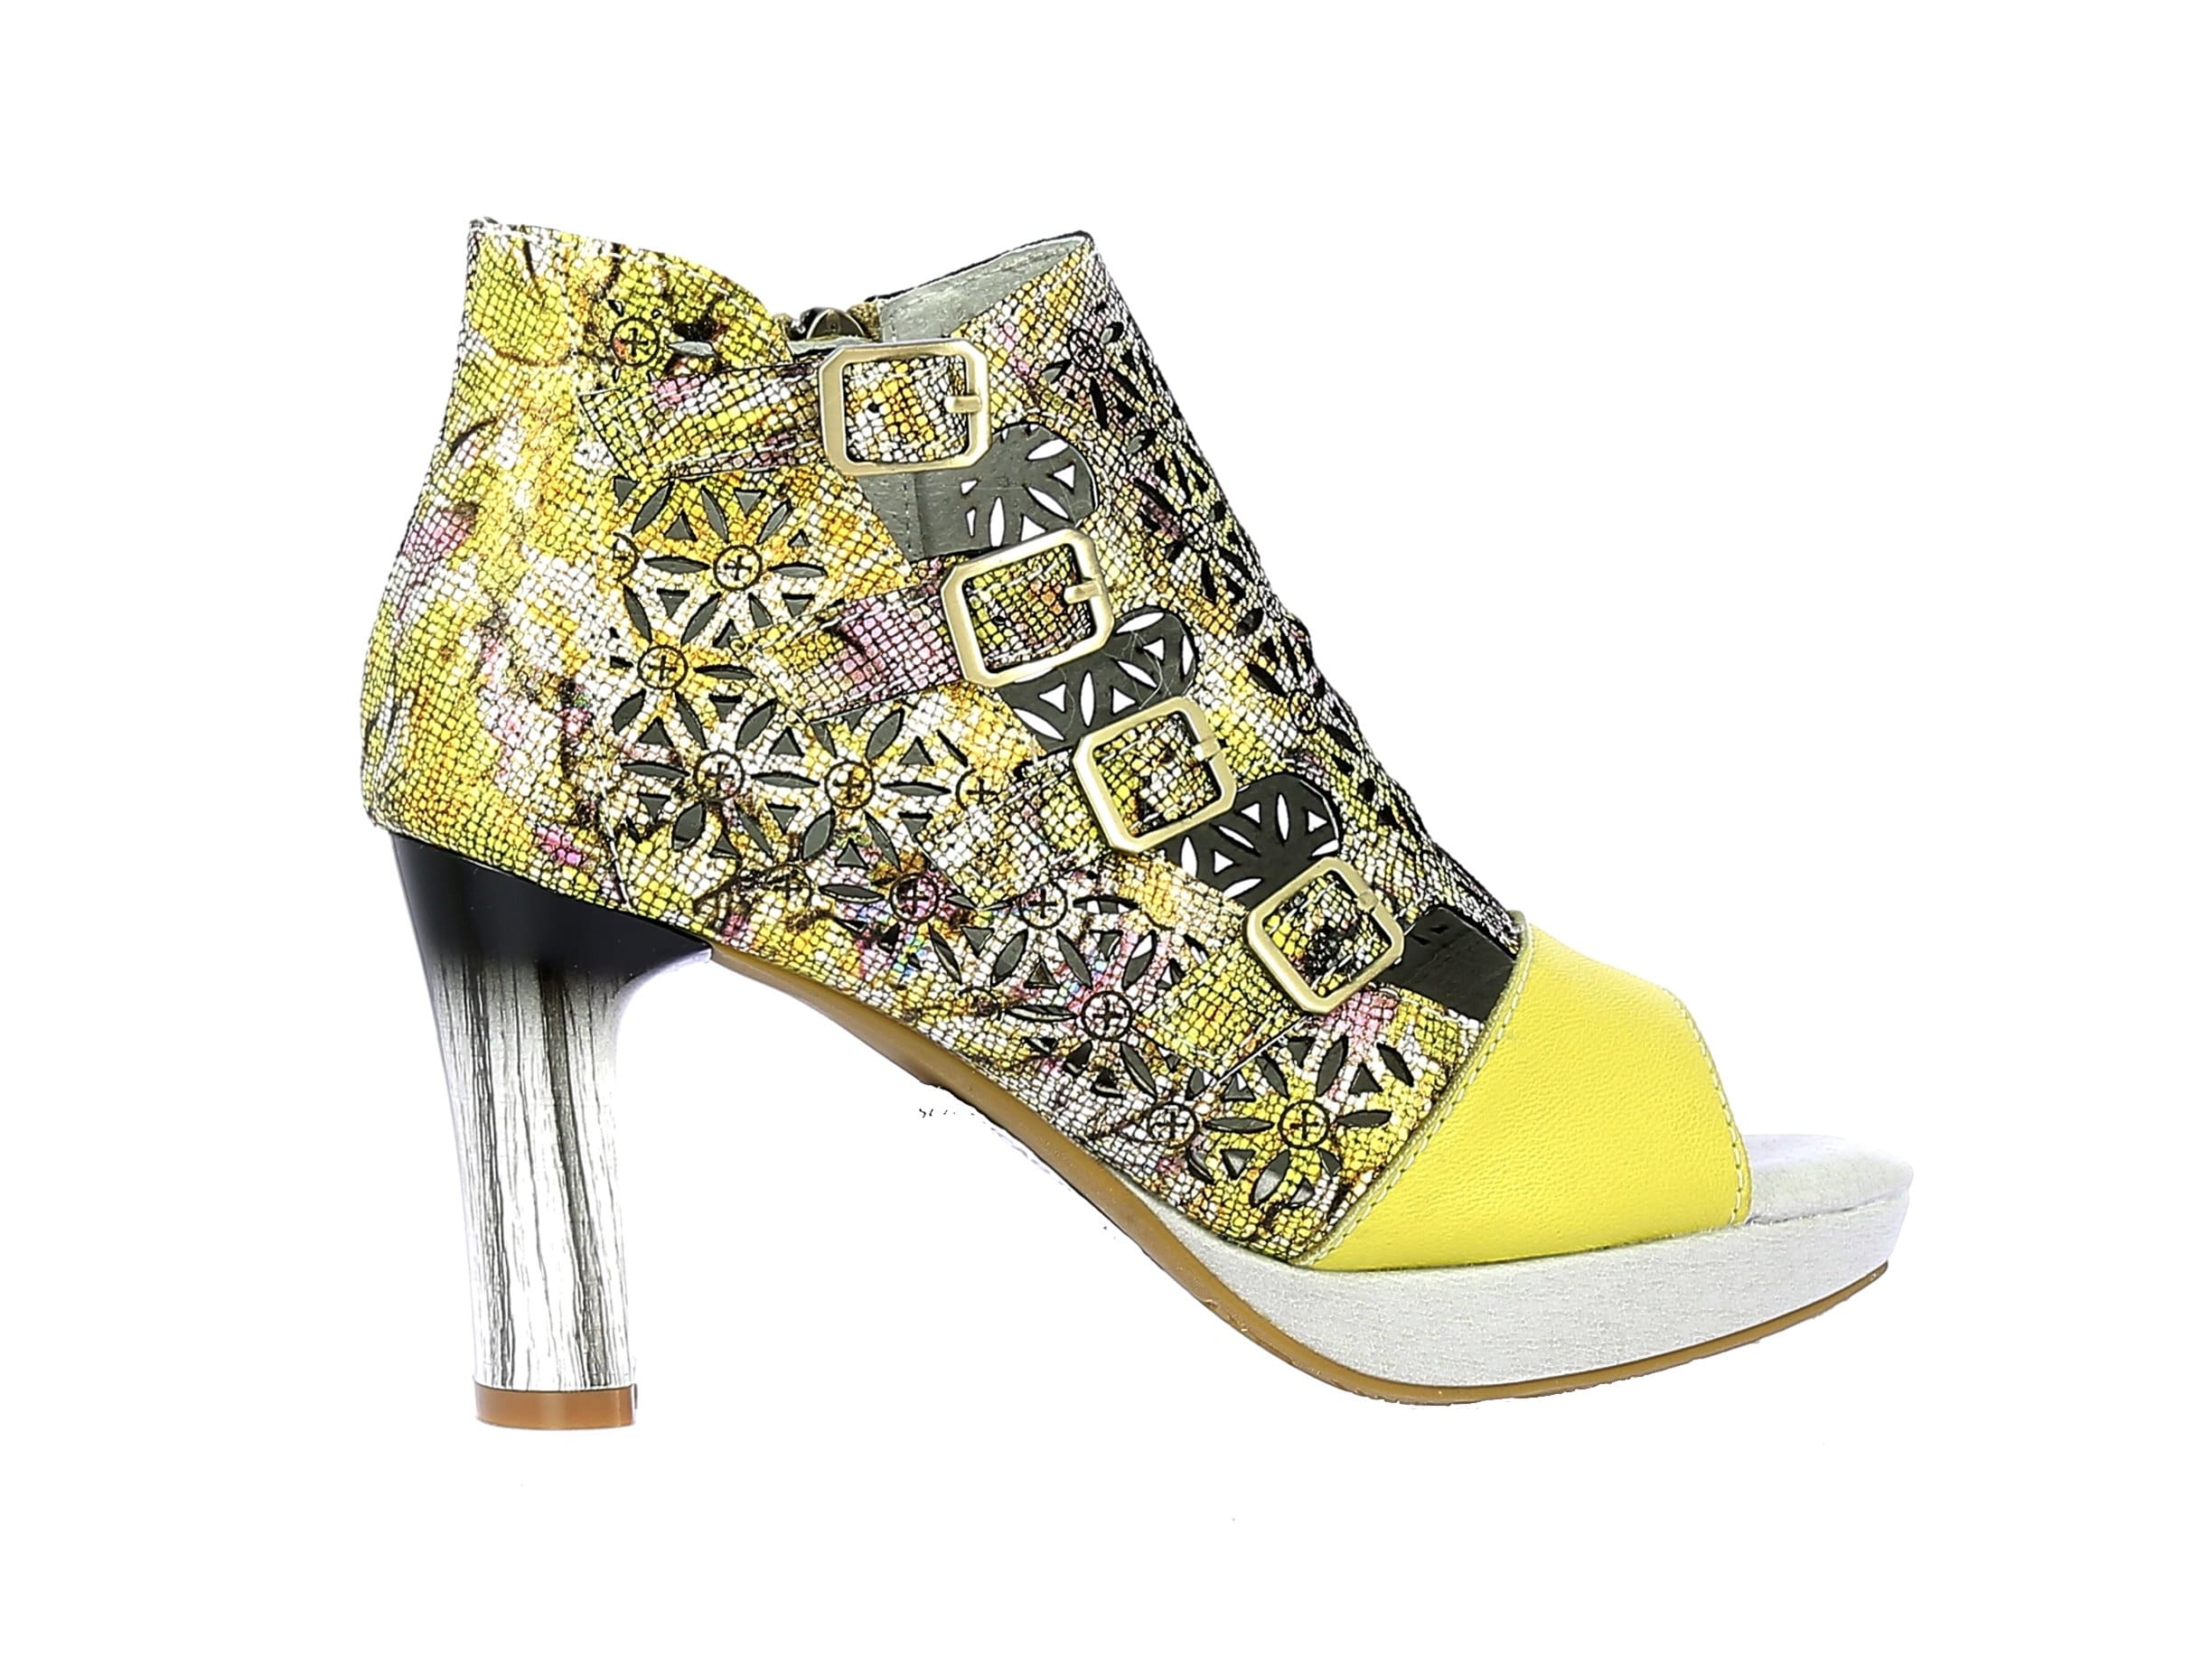 Chaussures HICAO 04 - 35 / YELLOW - Sandale